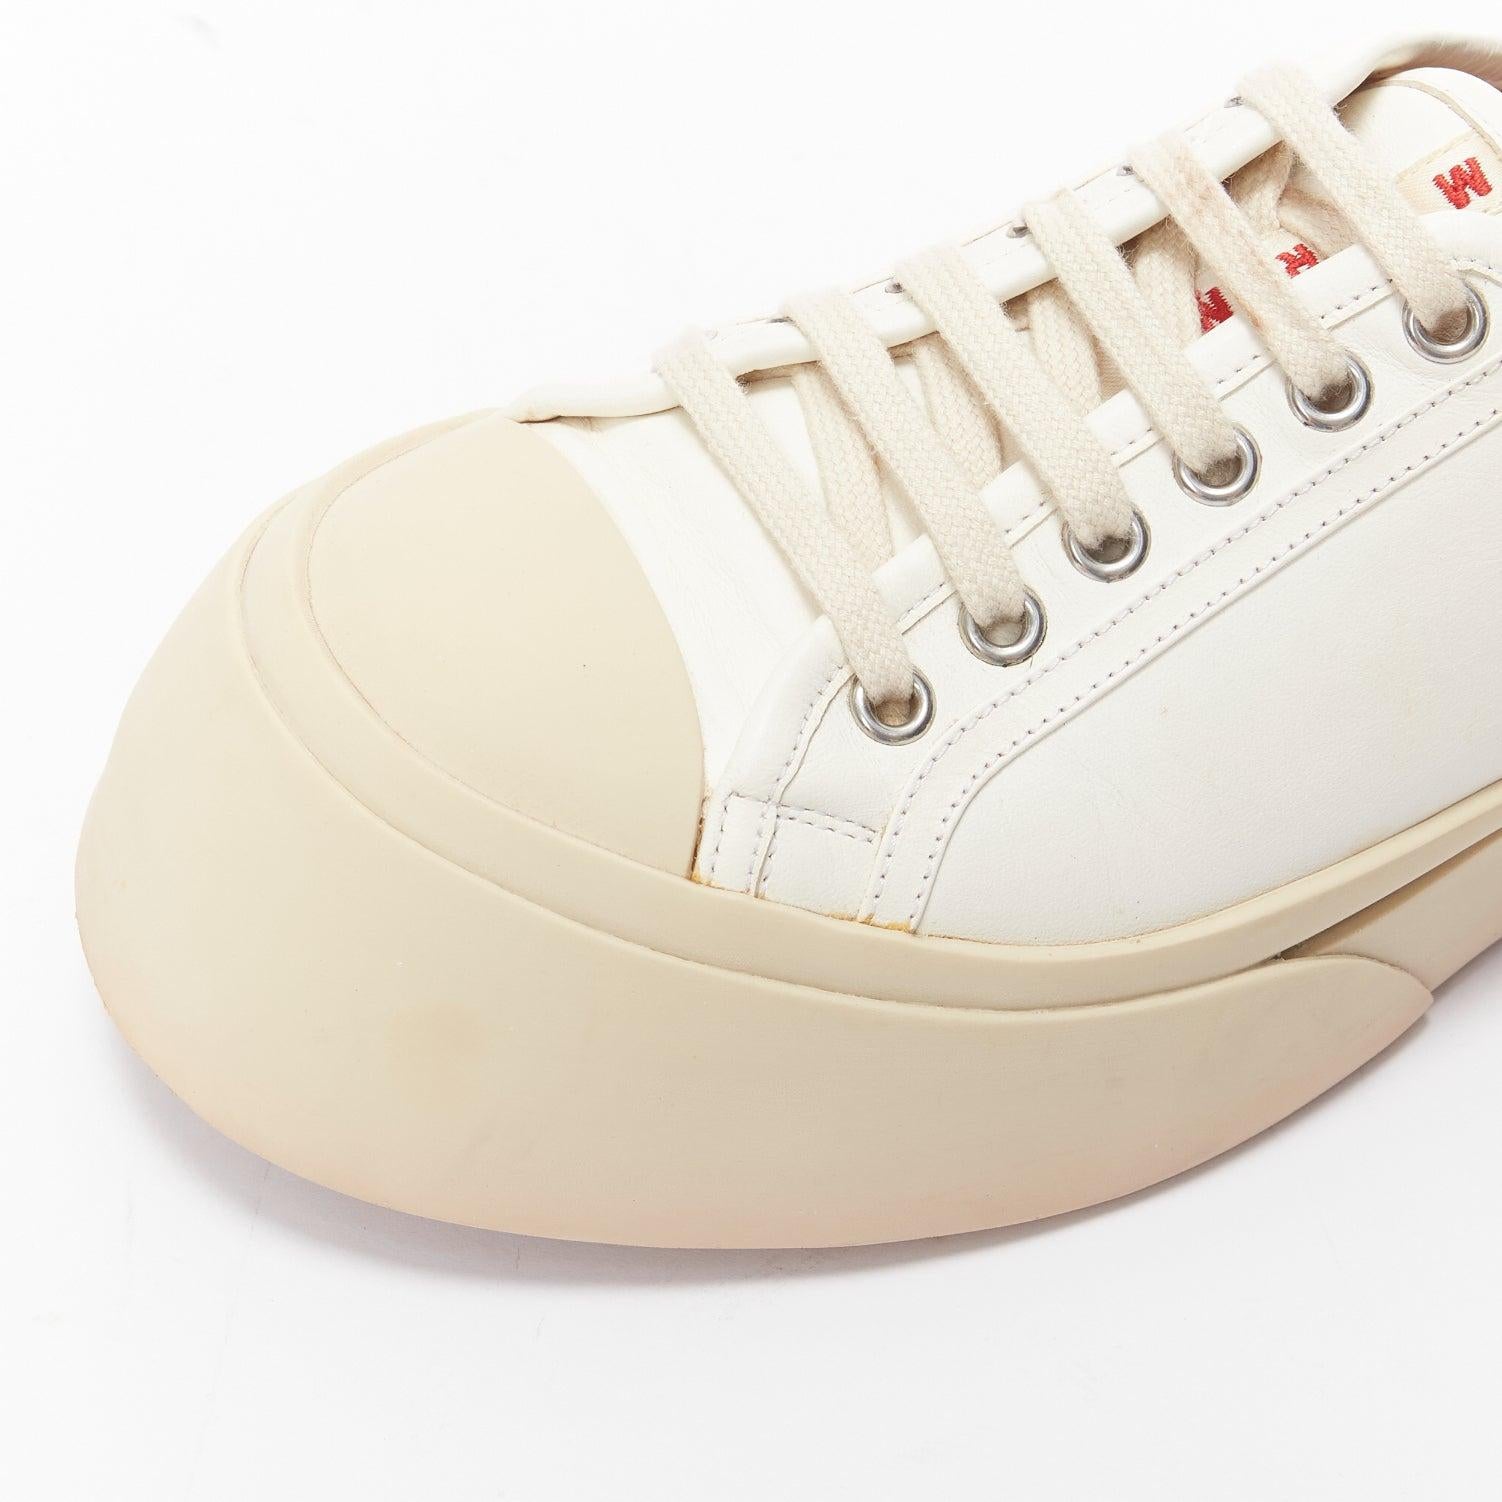 MARNI Pablo white leather chunky wide toe lace up low top sneakers EU36 For Sale 3